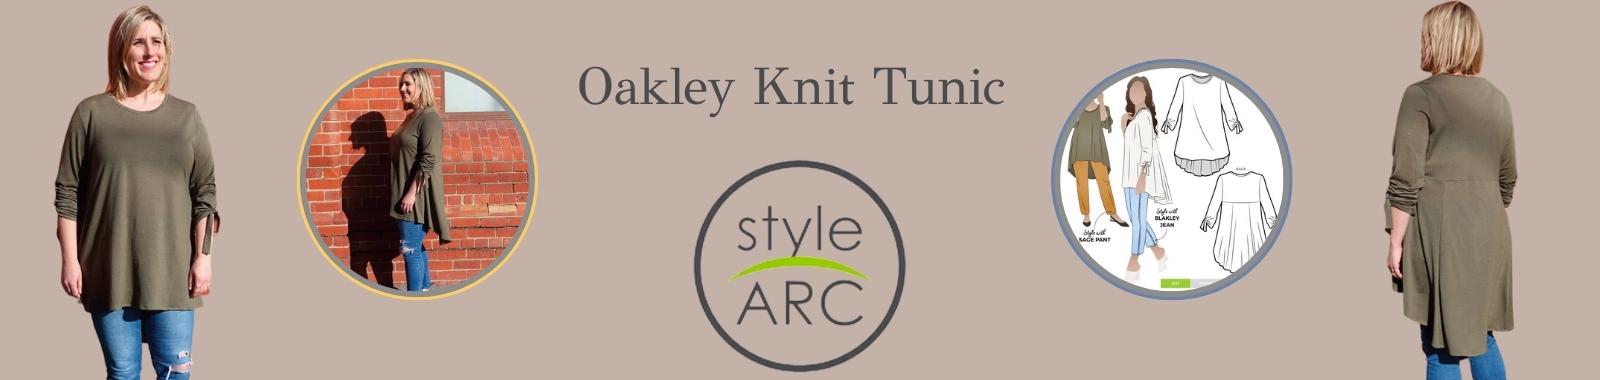 Sewing_Made_Simple_7_Patterns_Style Arc Oakley Knit Tunic